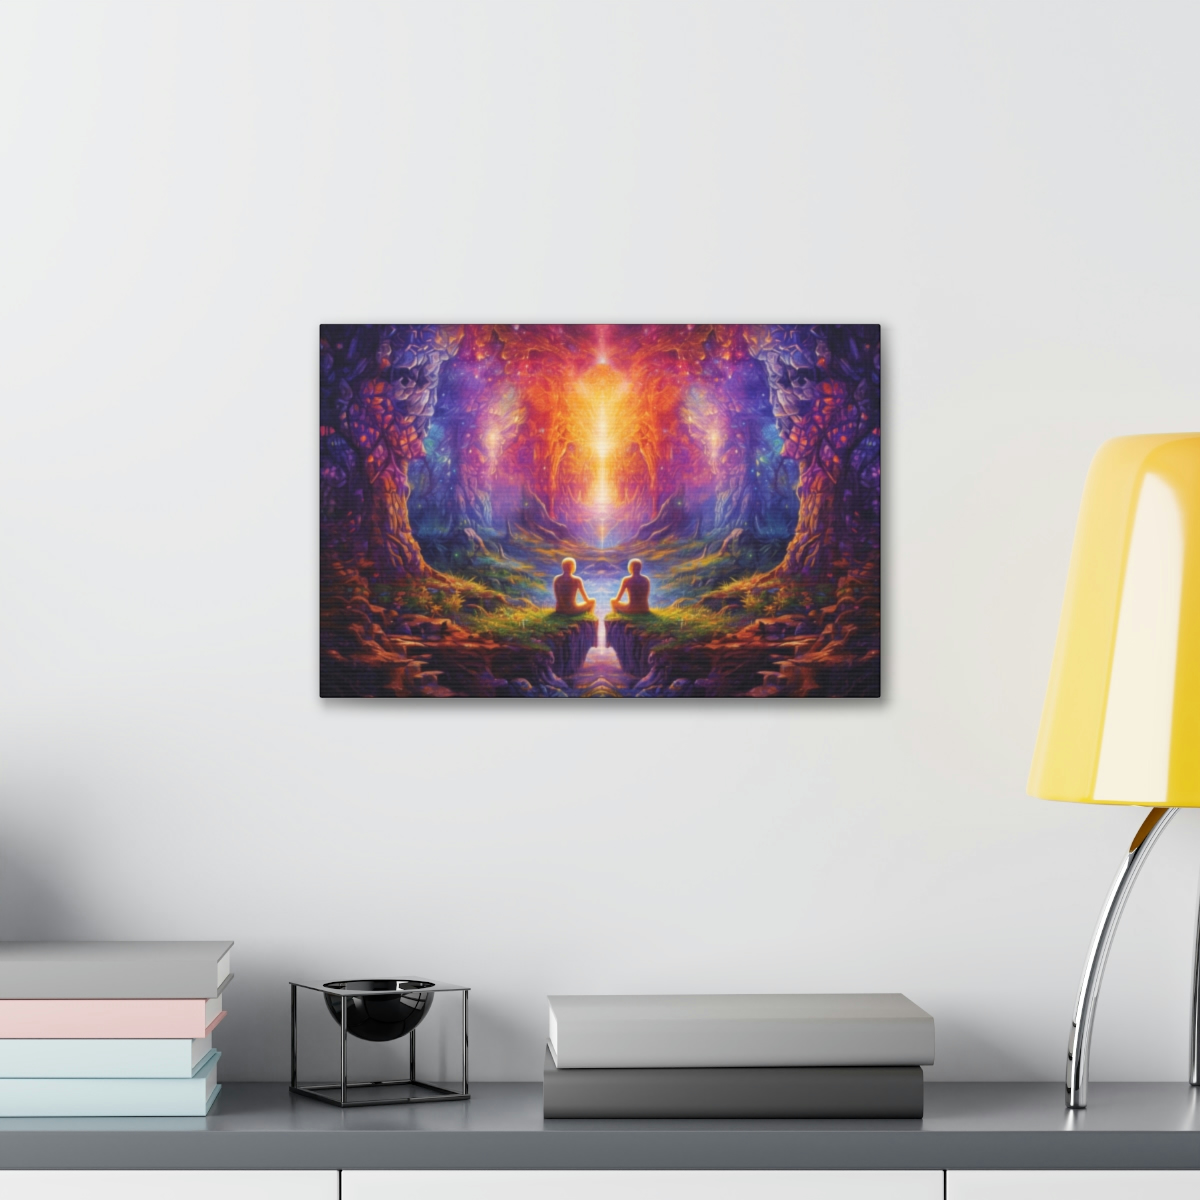 DMT Art Canvas Print: The Conversation In The Other Realm